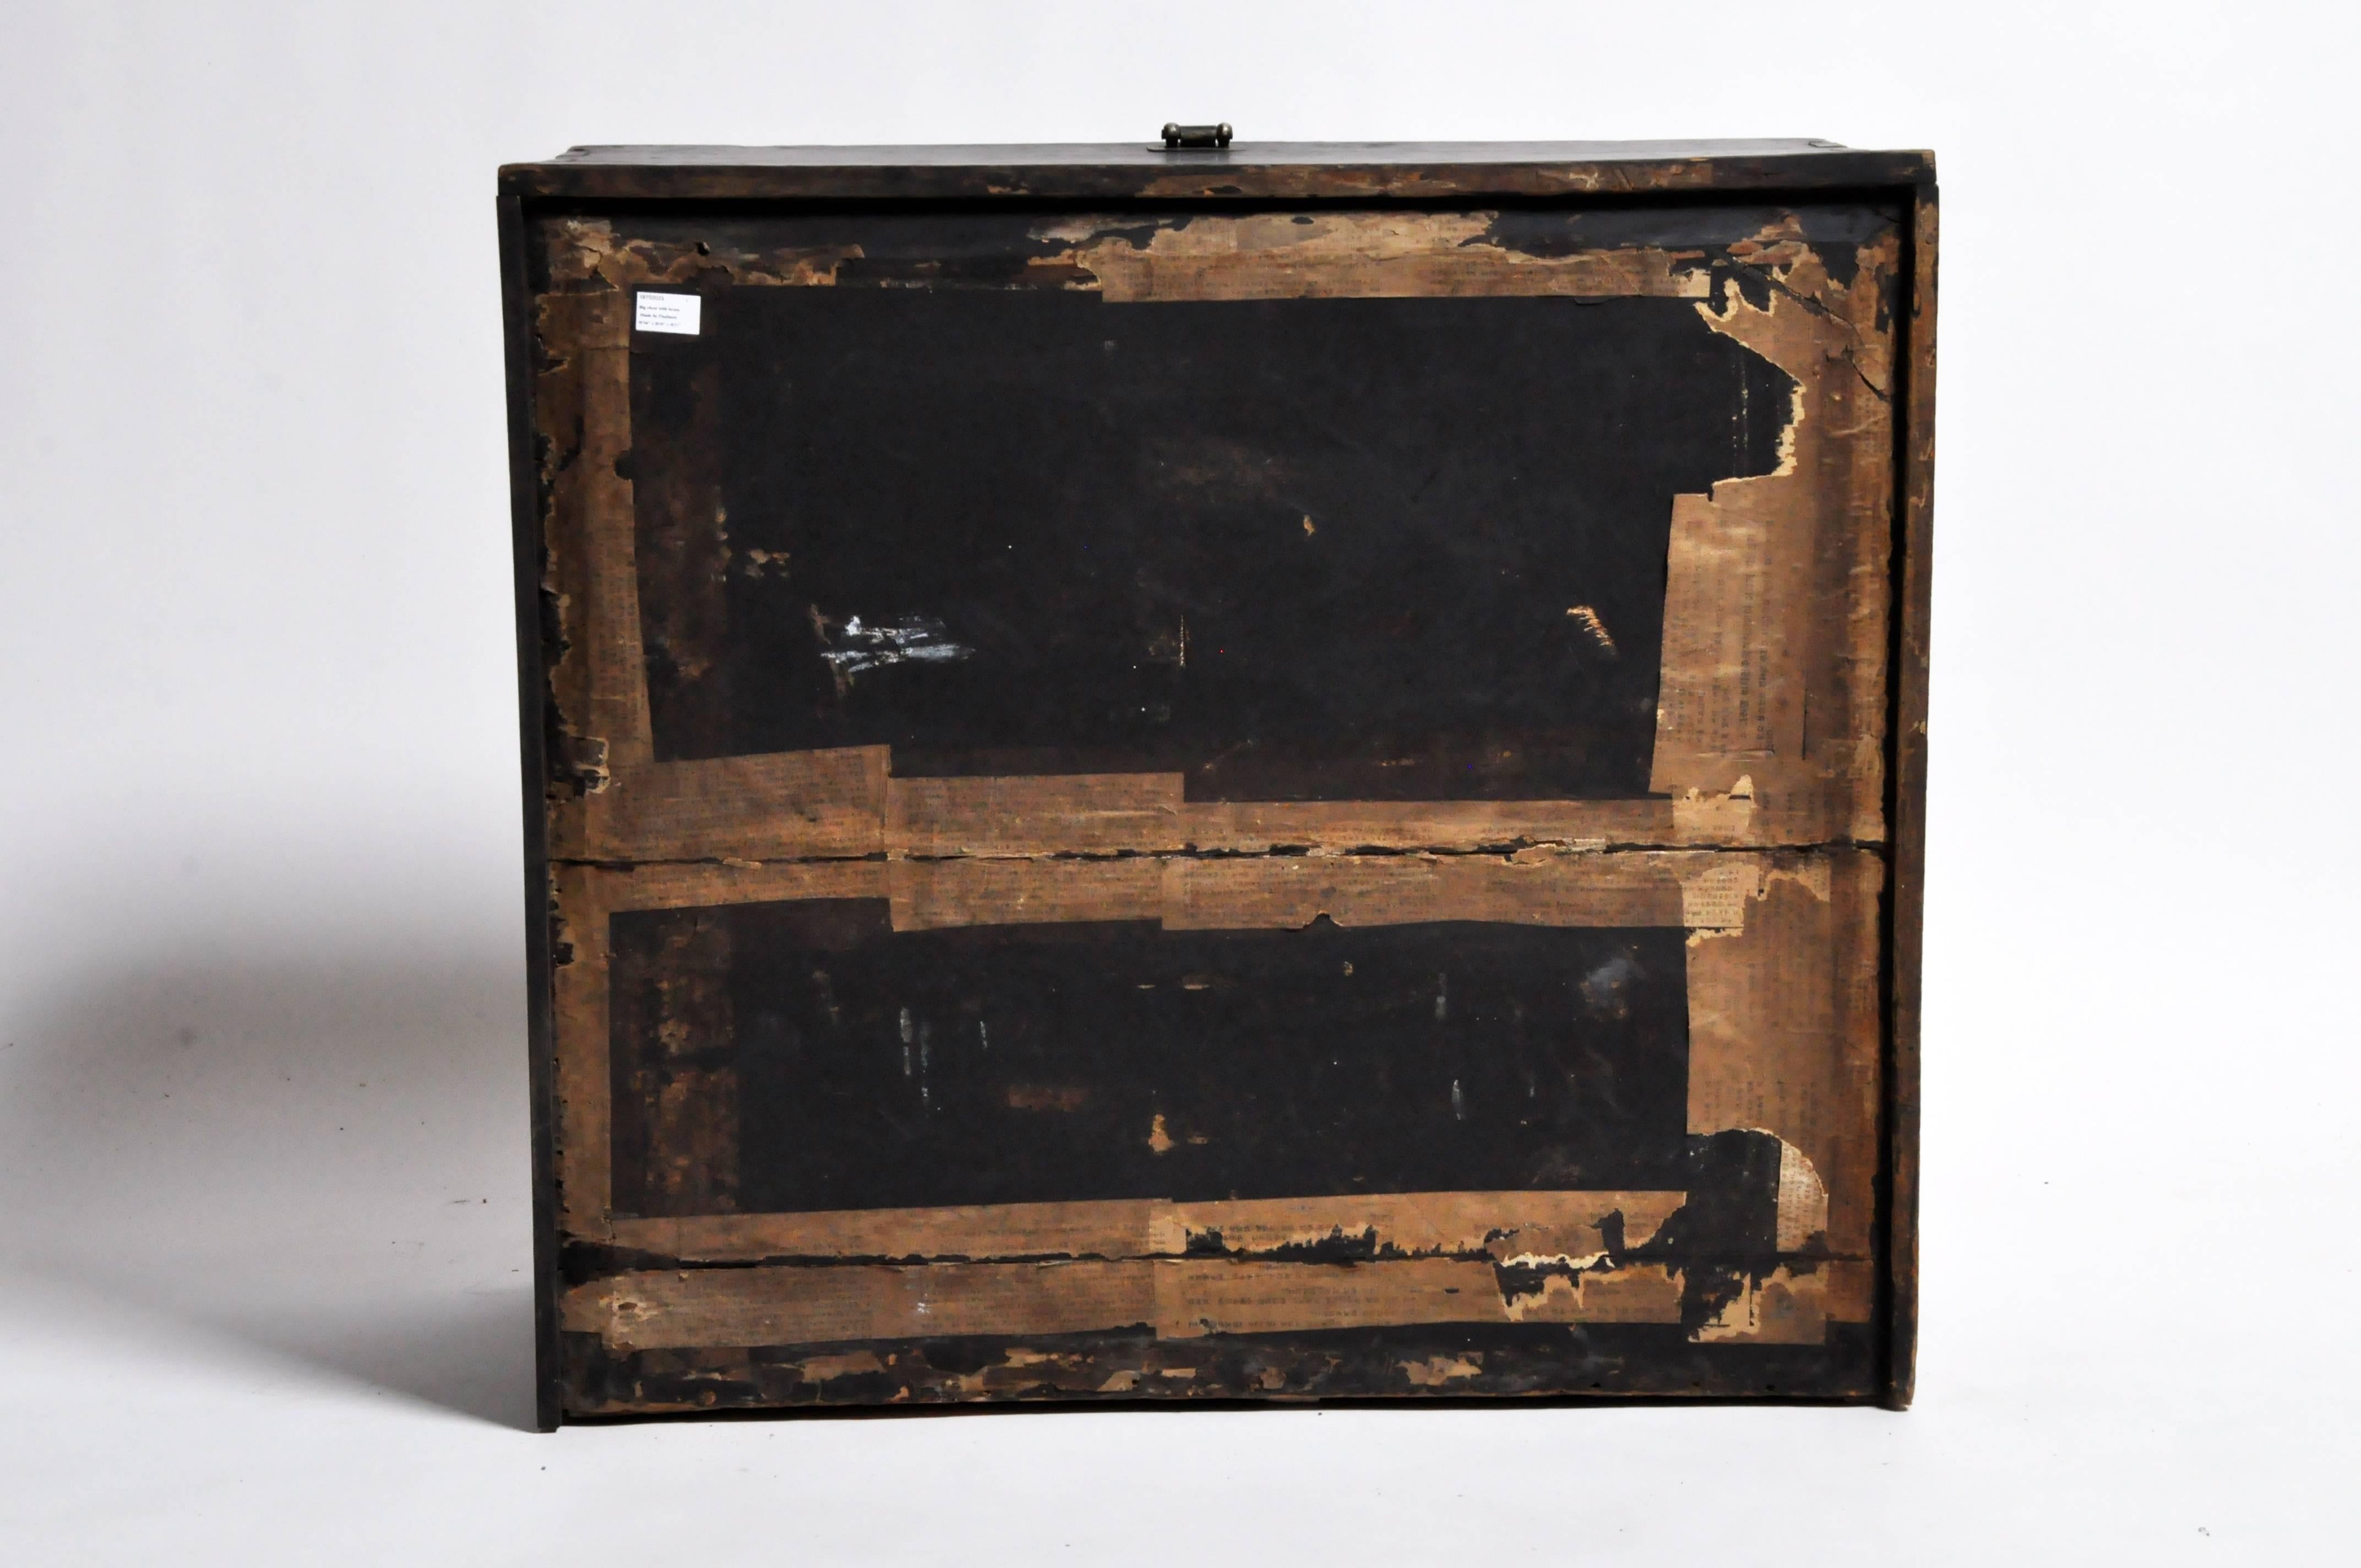 This softwood storage trunk has highly stylized decorative iron fittings, and was used to hold blankets, garments and other gifts that would be presented to the newlyweds as part of the dowry. It has a fall-front opening and large metal handles for